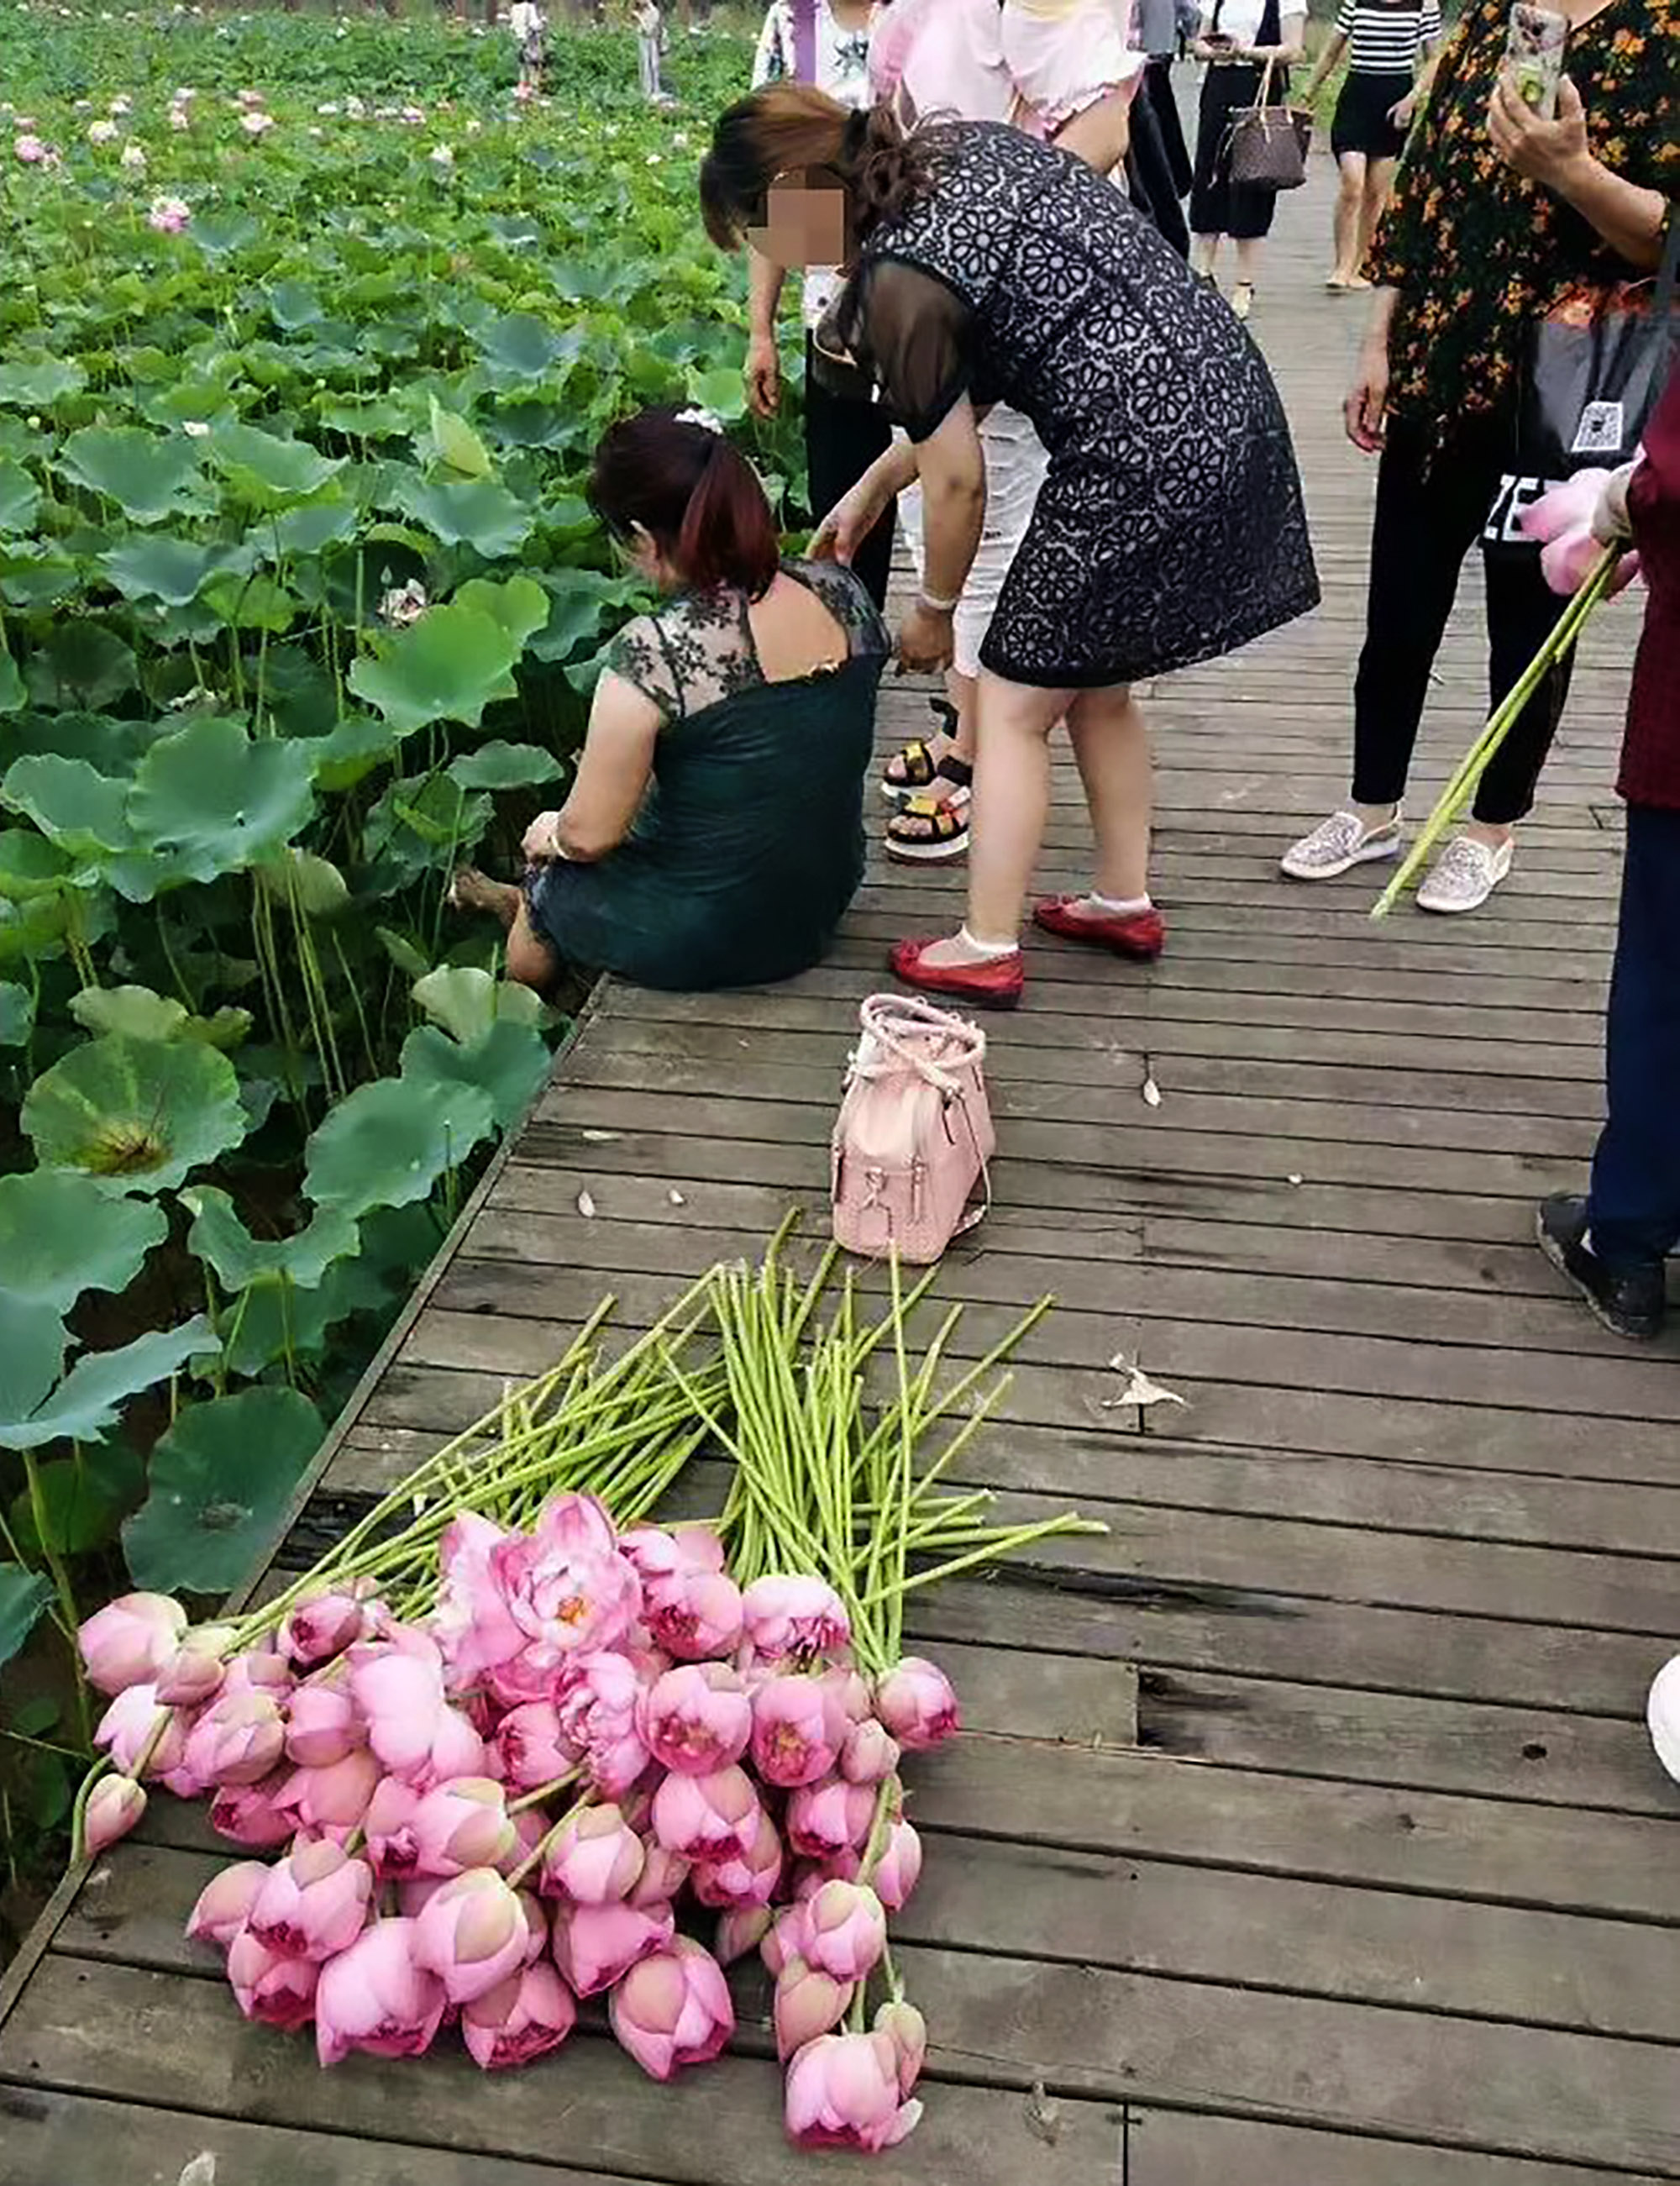 Read more about the article Tourists Nick Precious Lotus Flowers From Closed Park